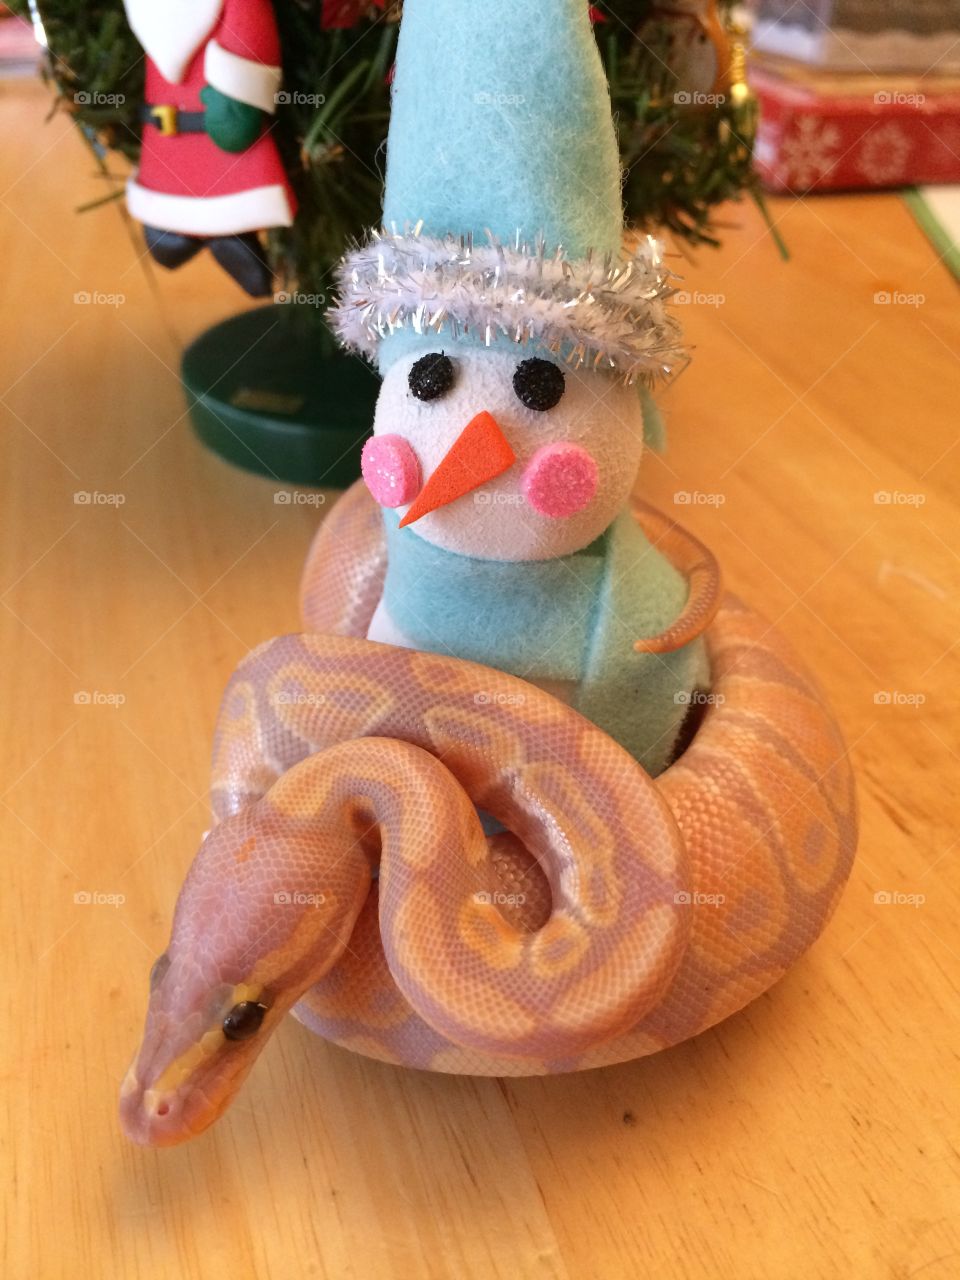 Happy holidays from Mango and his snow man!